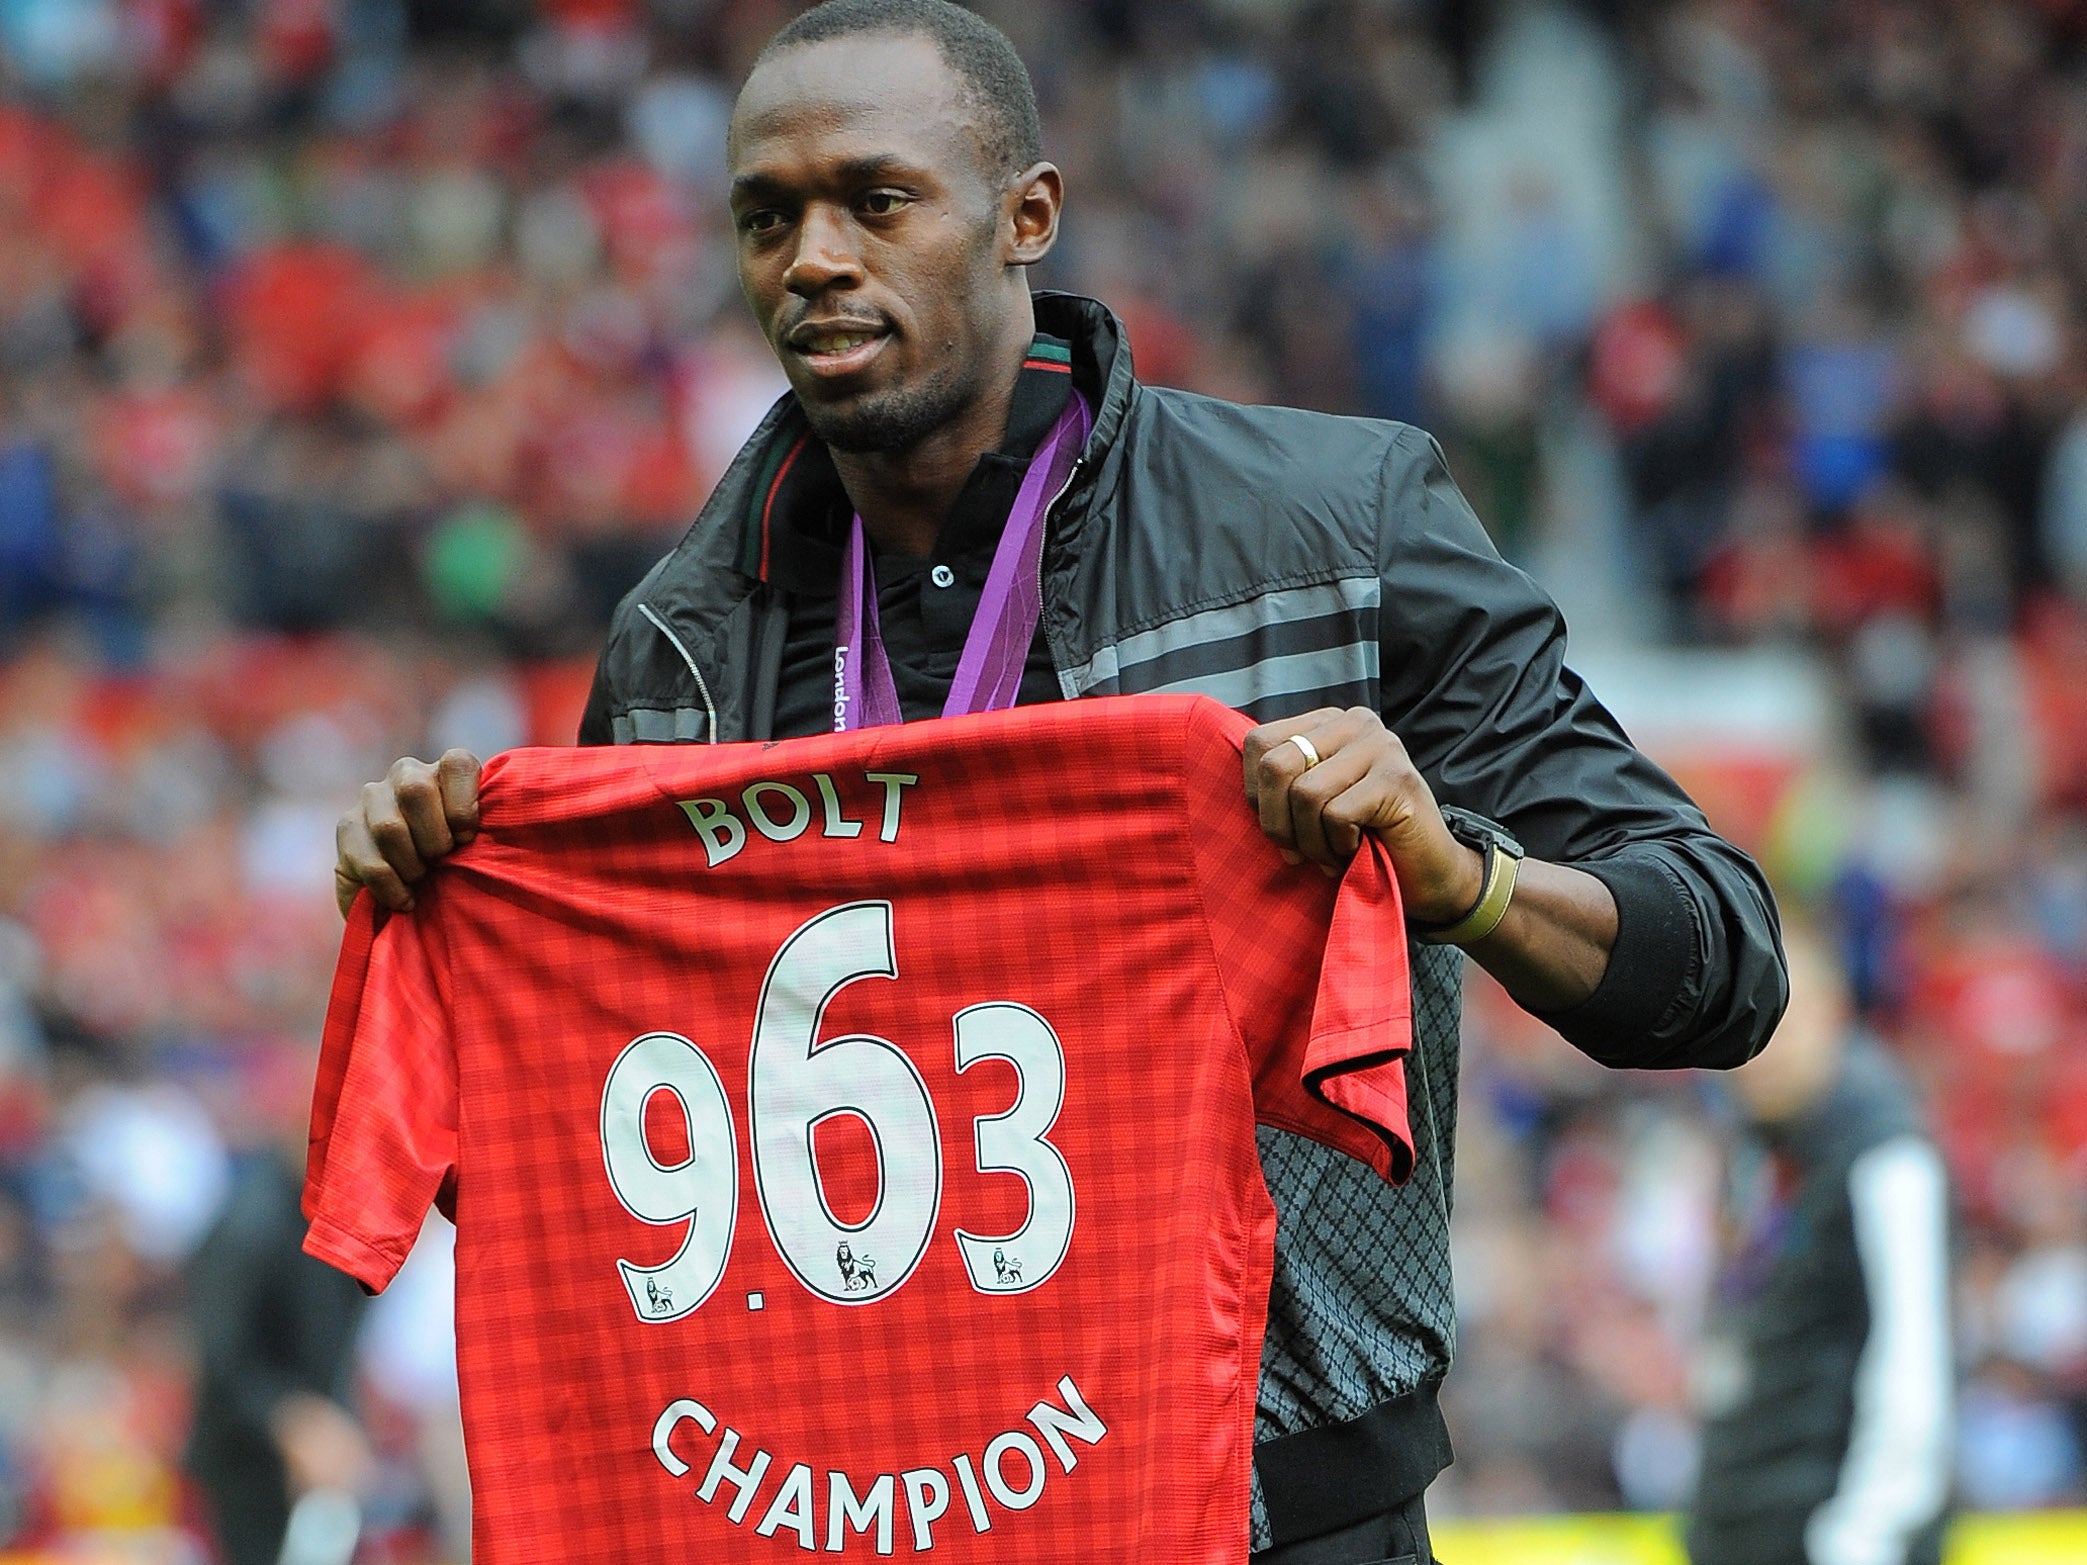 Usain Bolt wants to play for Manchester United one day